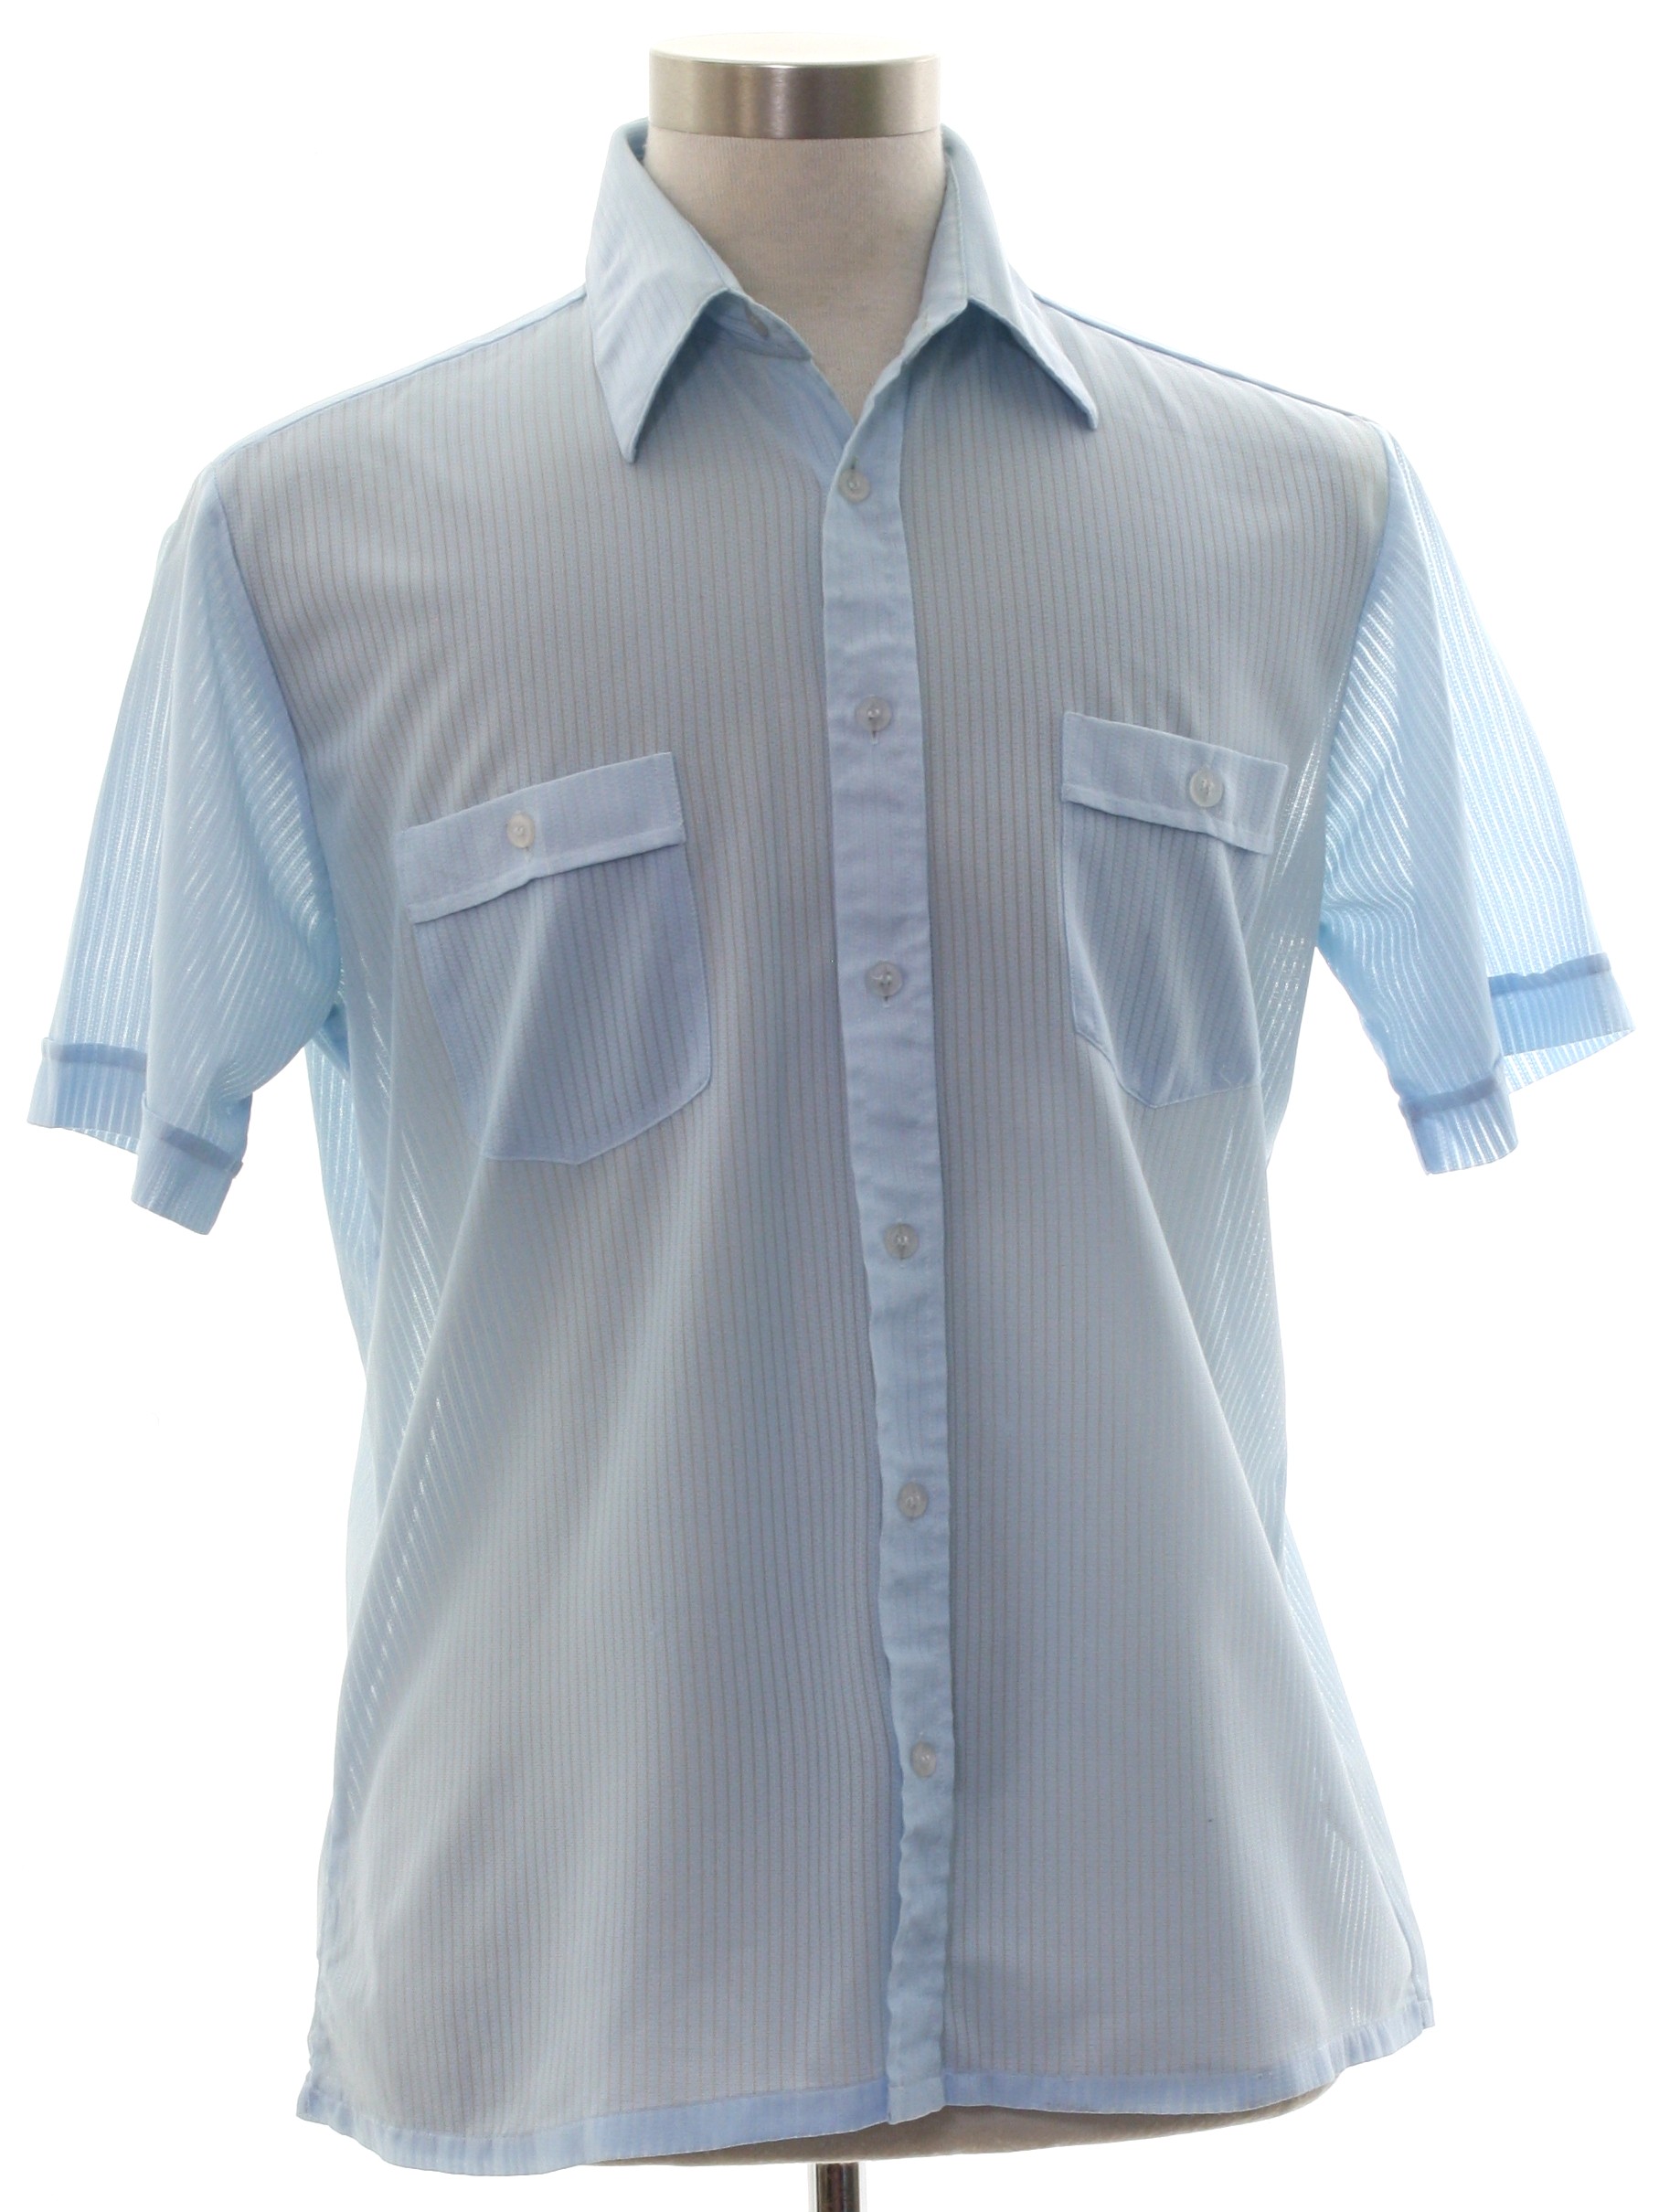 Eighties Vintage Shirt: 80s style (made recently) -Townsley- Mens light ...